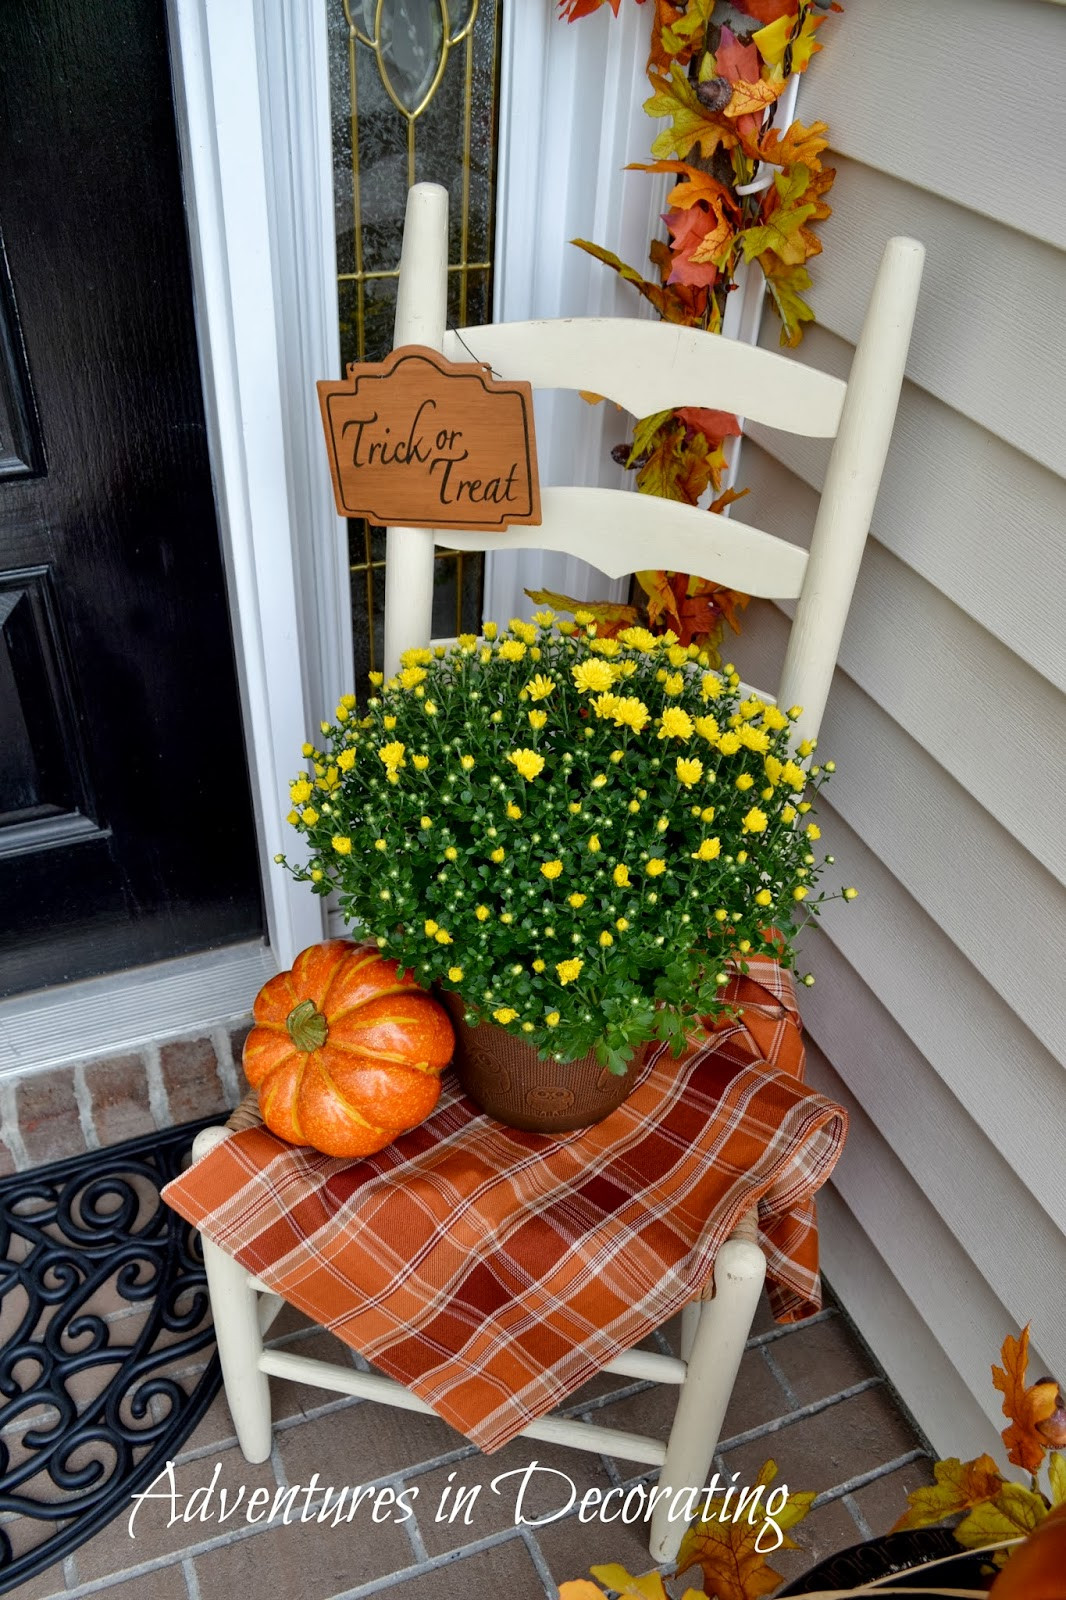 Front Porch Fall Decorating Ideas
 Adventures in Decorating Our Fall Front Porch